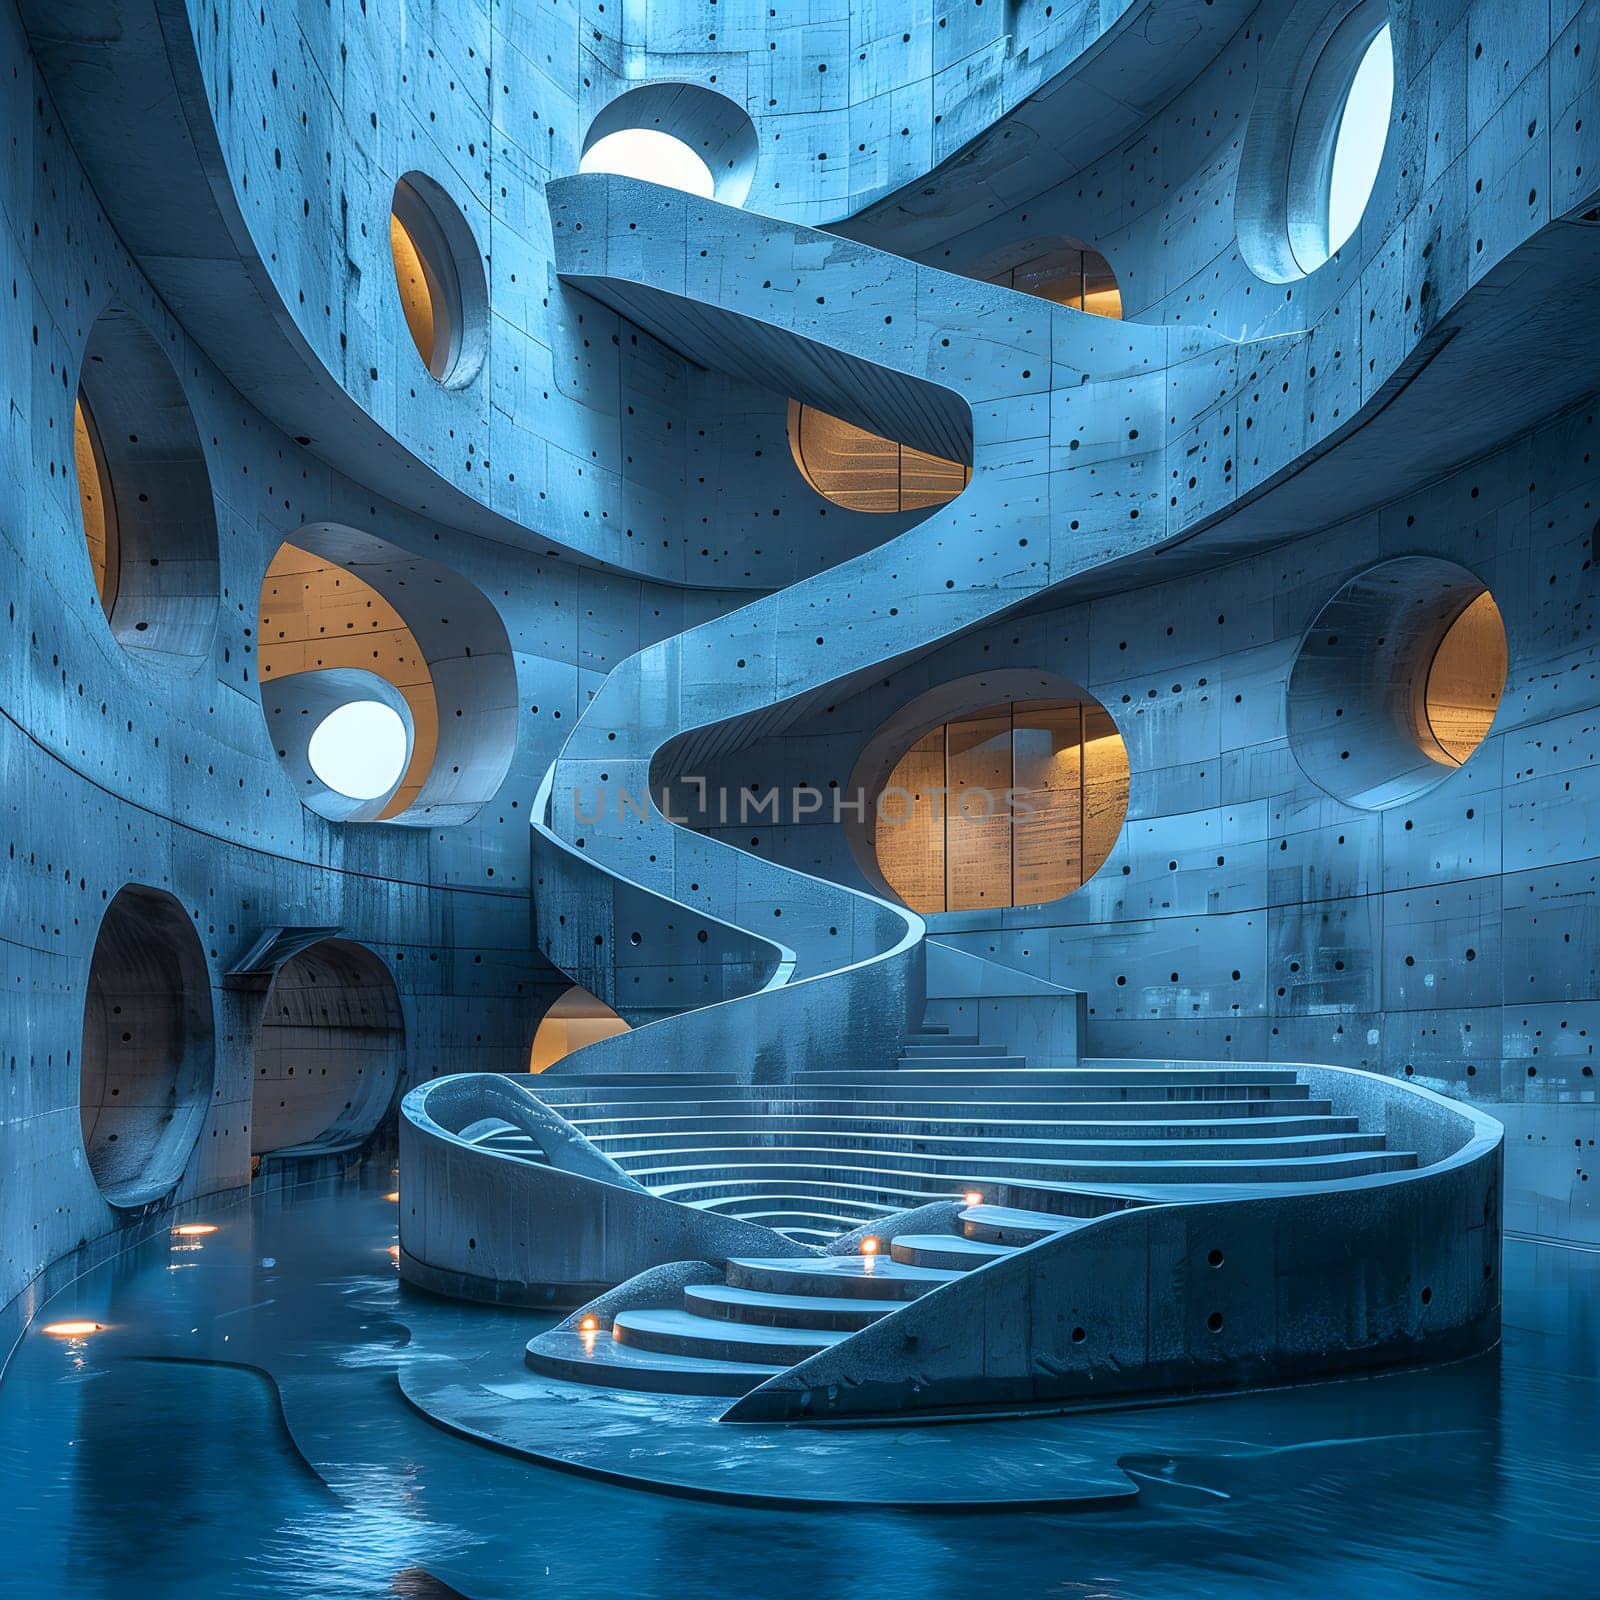 A waterlike azure building featuring electric blue glass windows, a spiral staircase, and unique artistic patterns creating a space of modern art and graphics